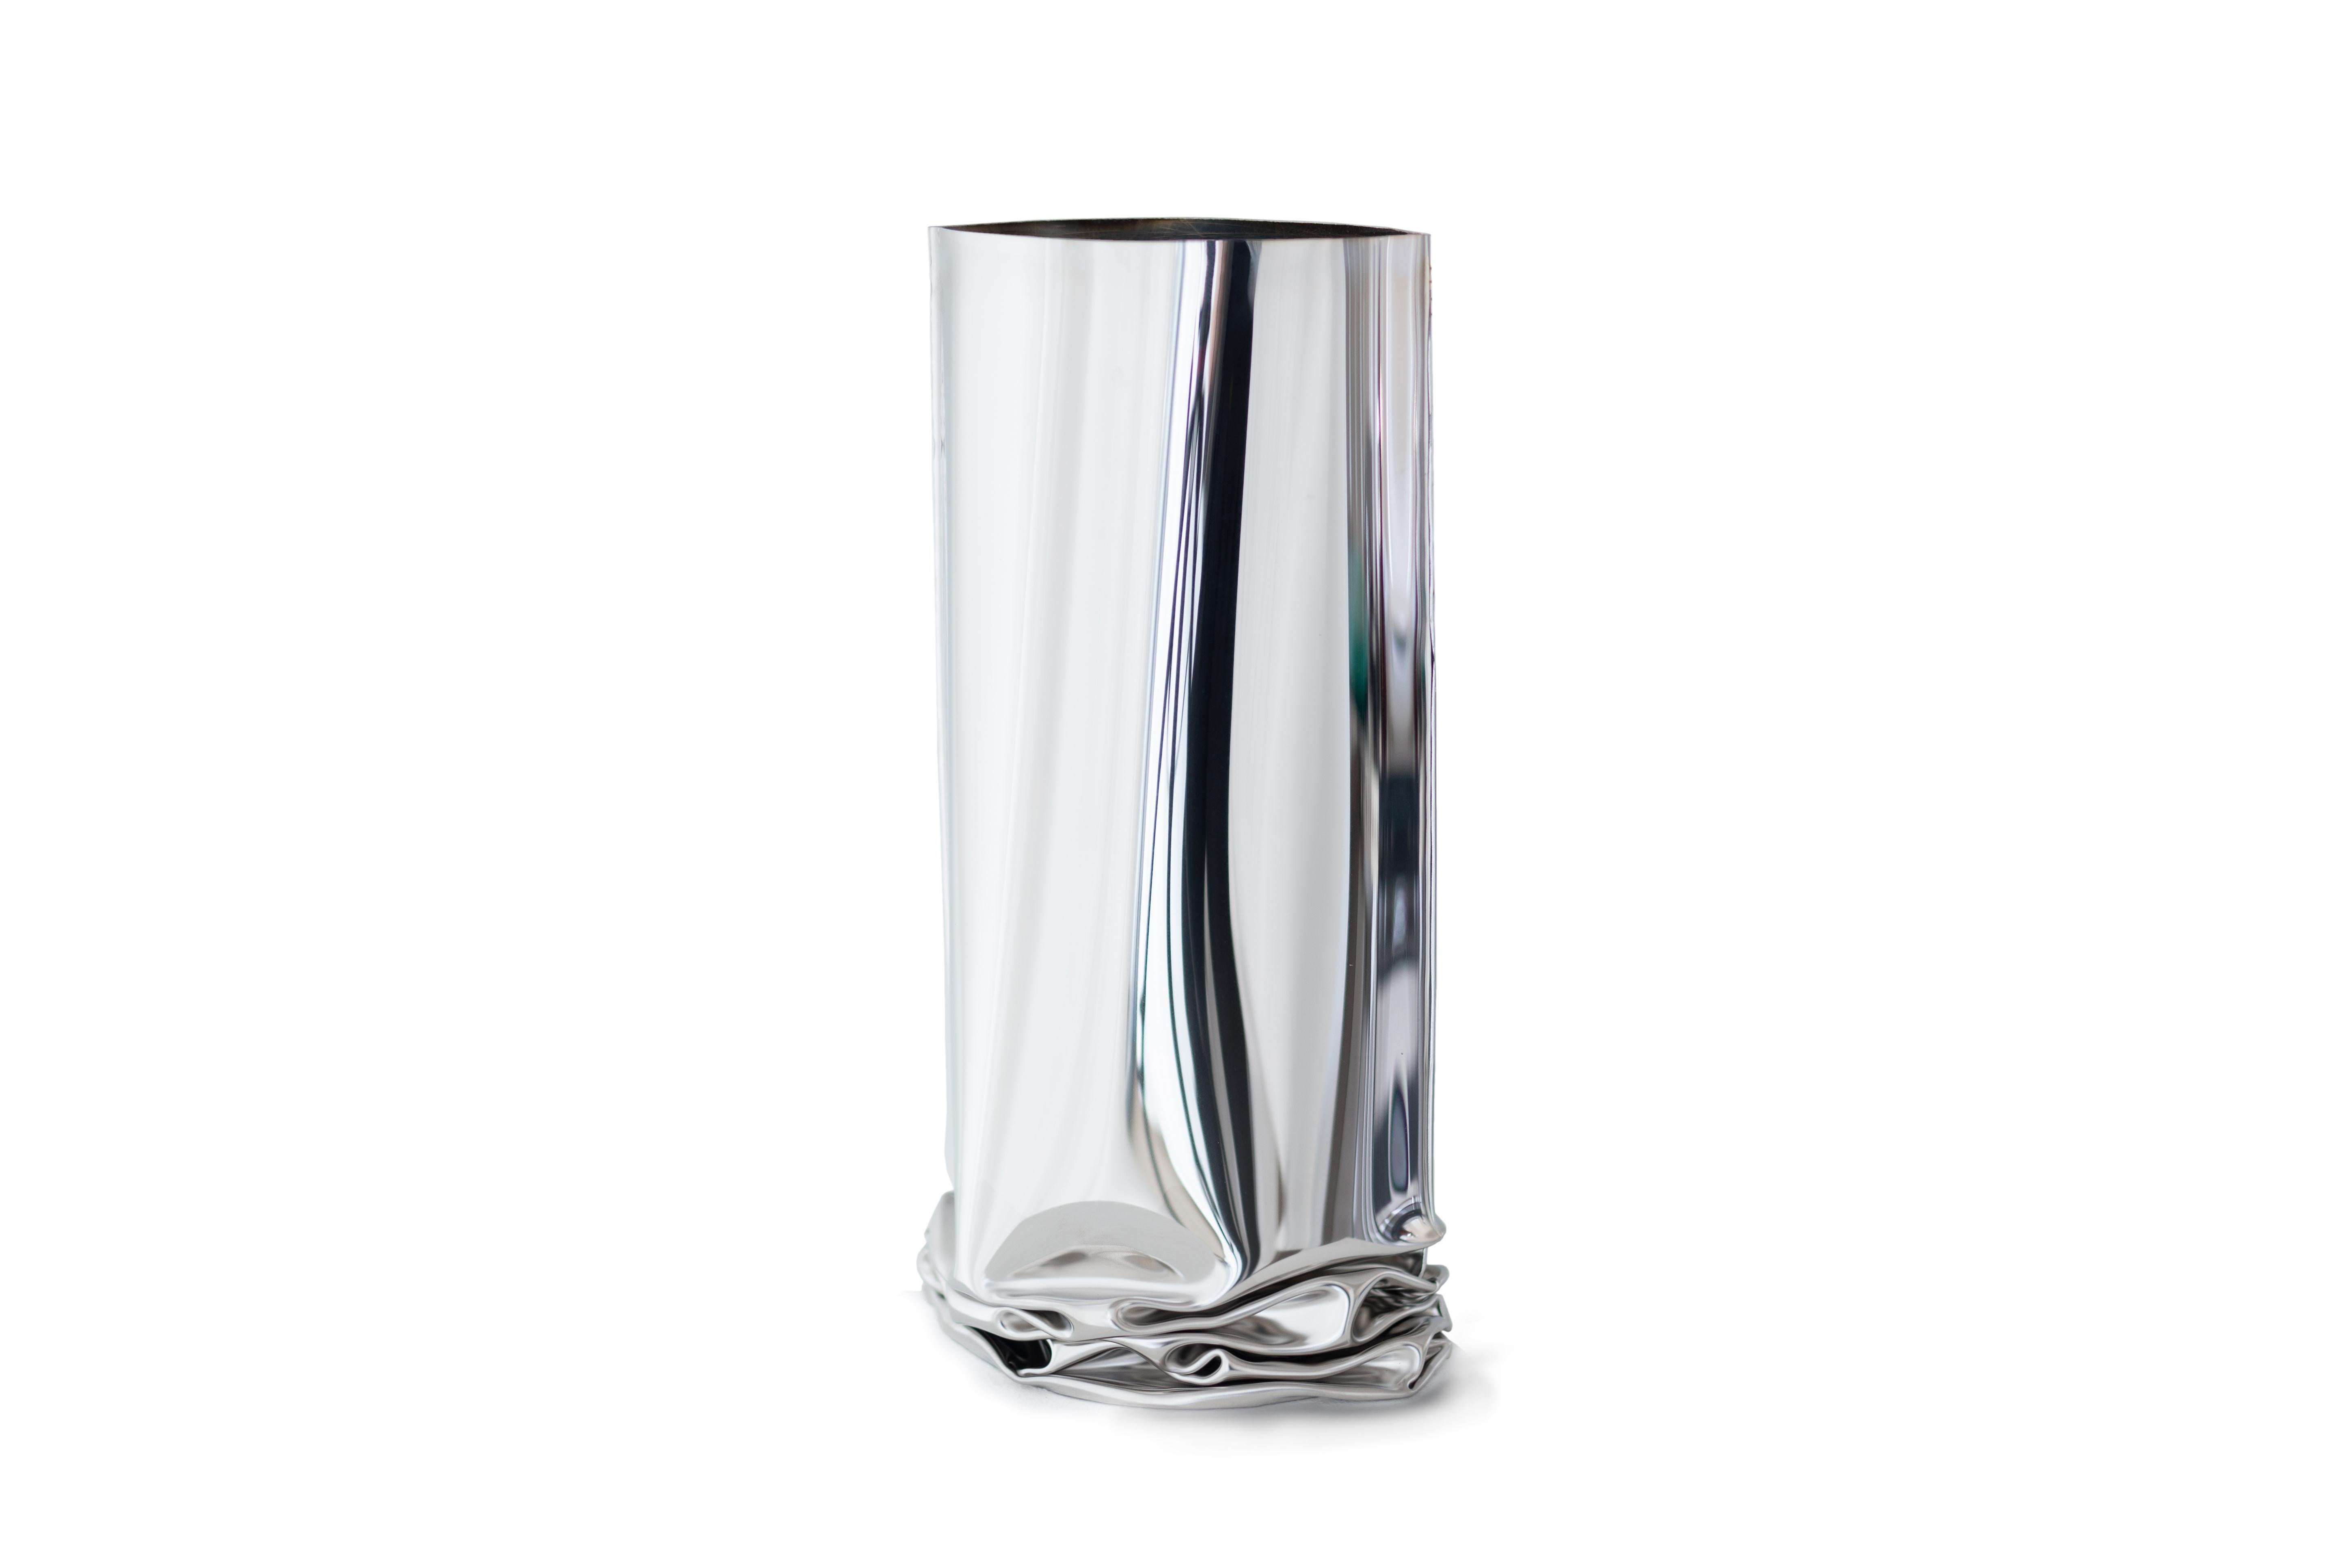 Crash 3 vase by Zieta
Dimensions: D 25 x W 19 x H 35 cm
Materials: stainless steel.


Zietas main goal is to deliver uniqueness and customization in design and constructions while keeping the production, transport and warehousing innovatively